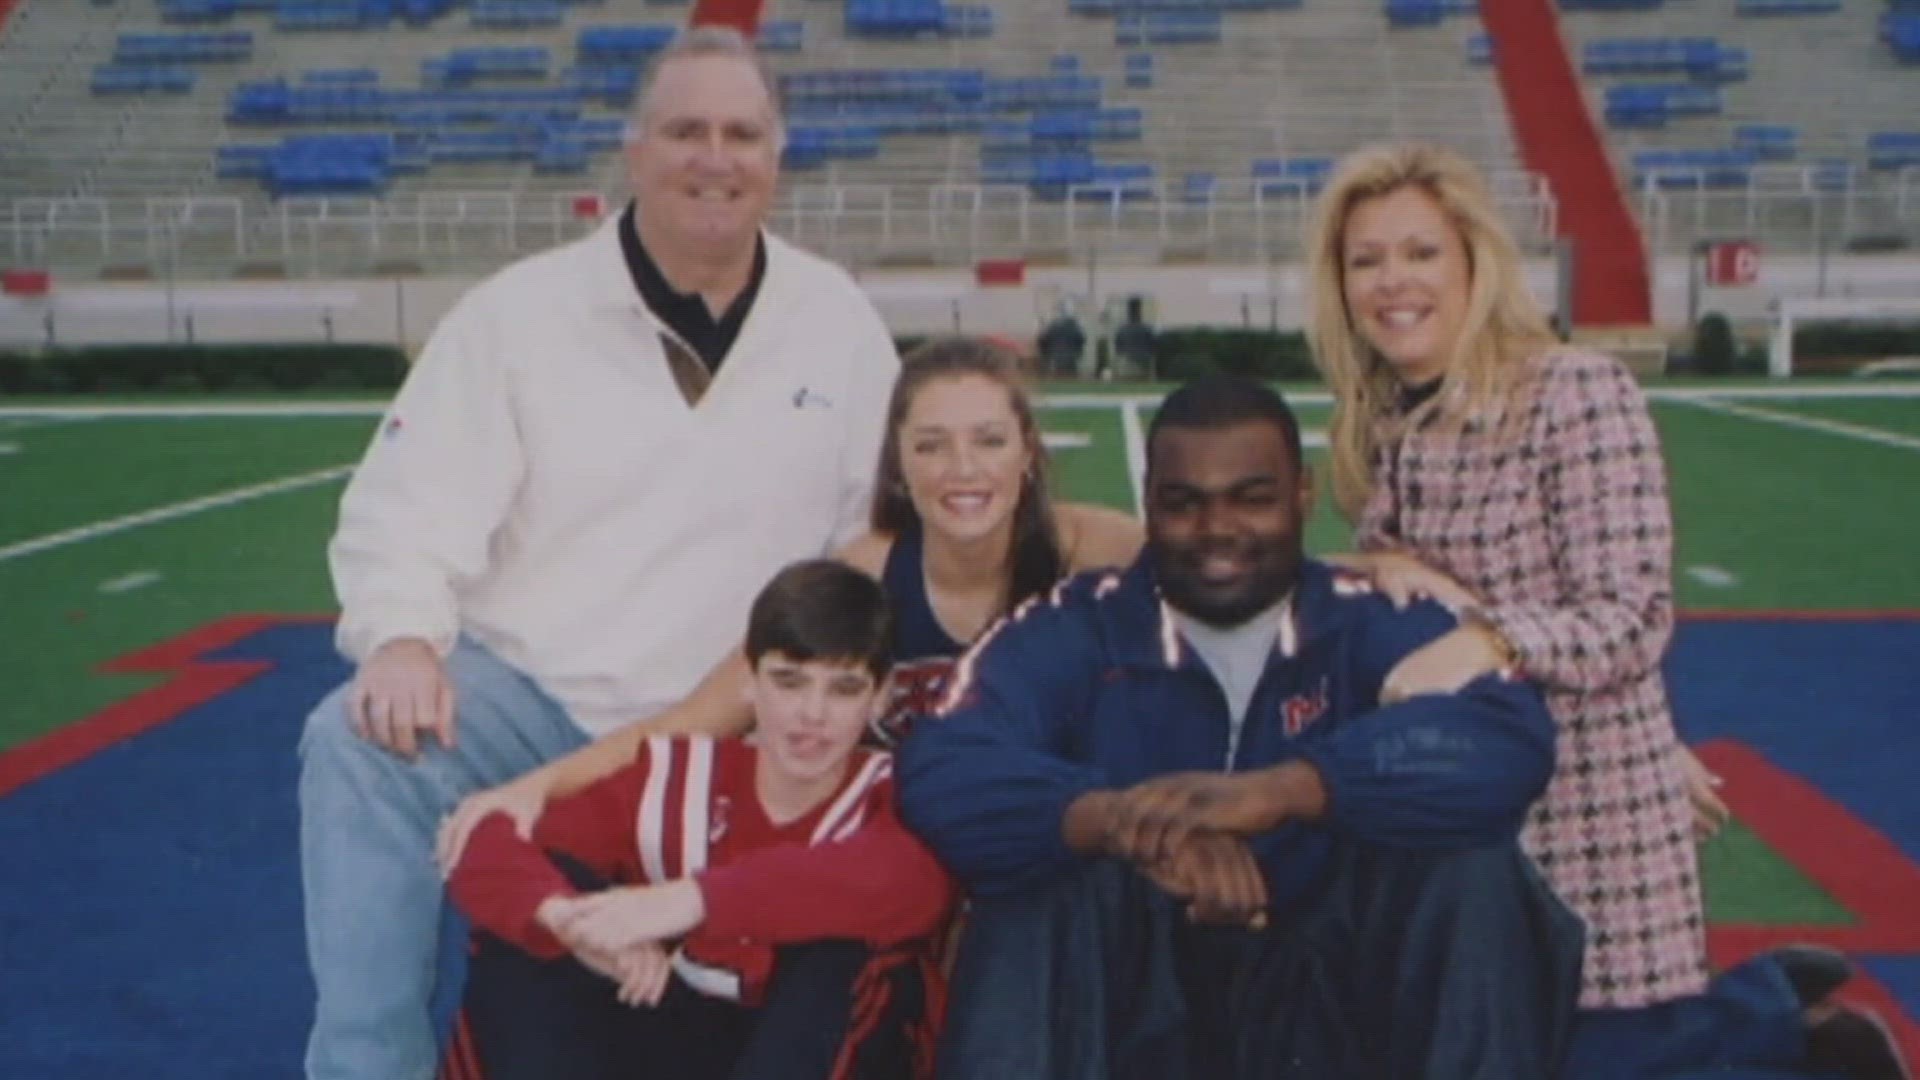 Blind Side' family calls football player's accusations 'hurtful and absurd'  